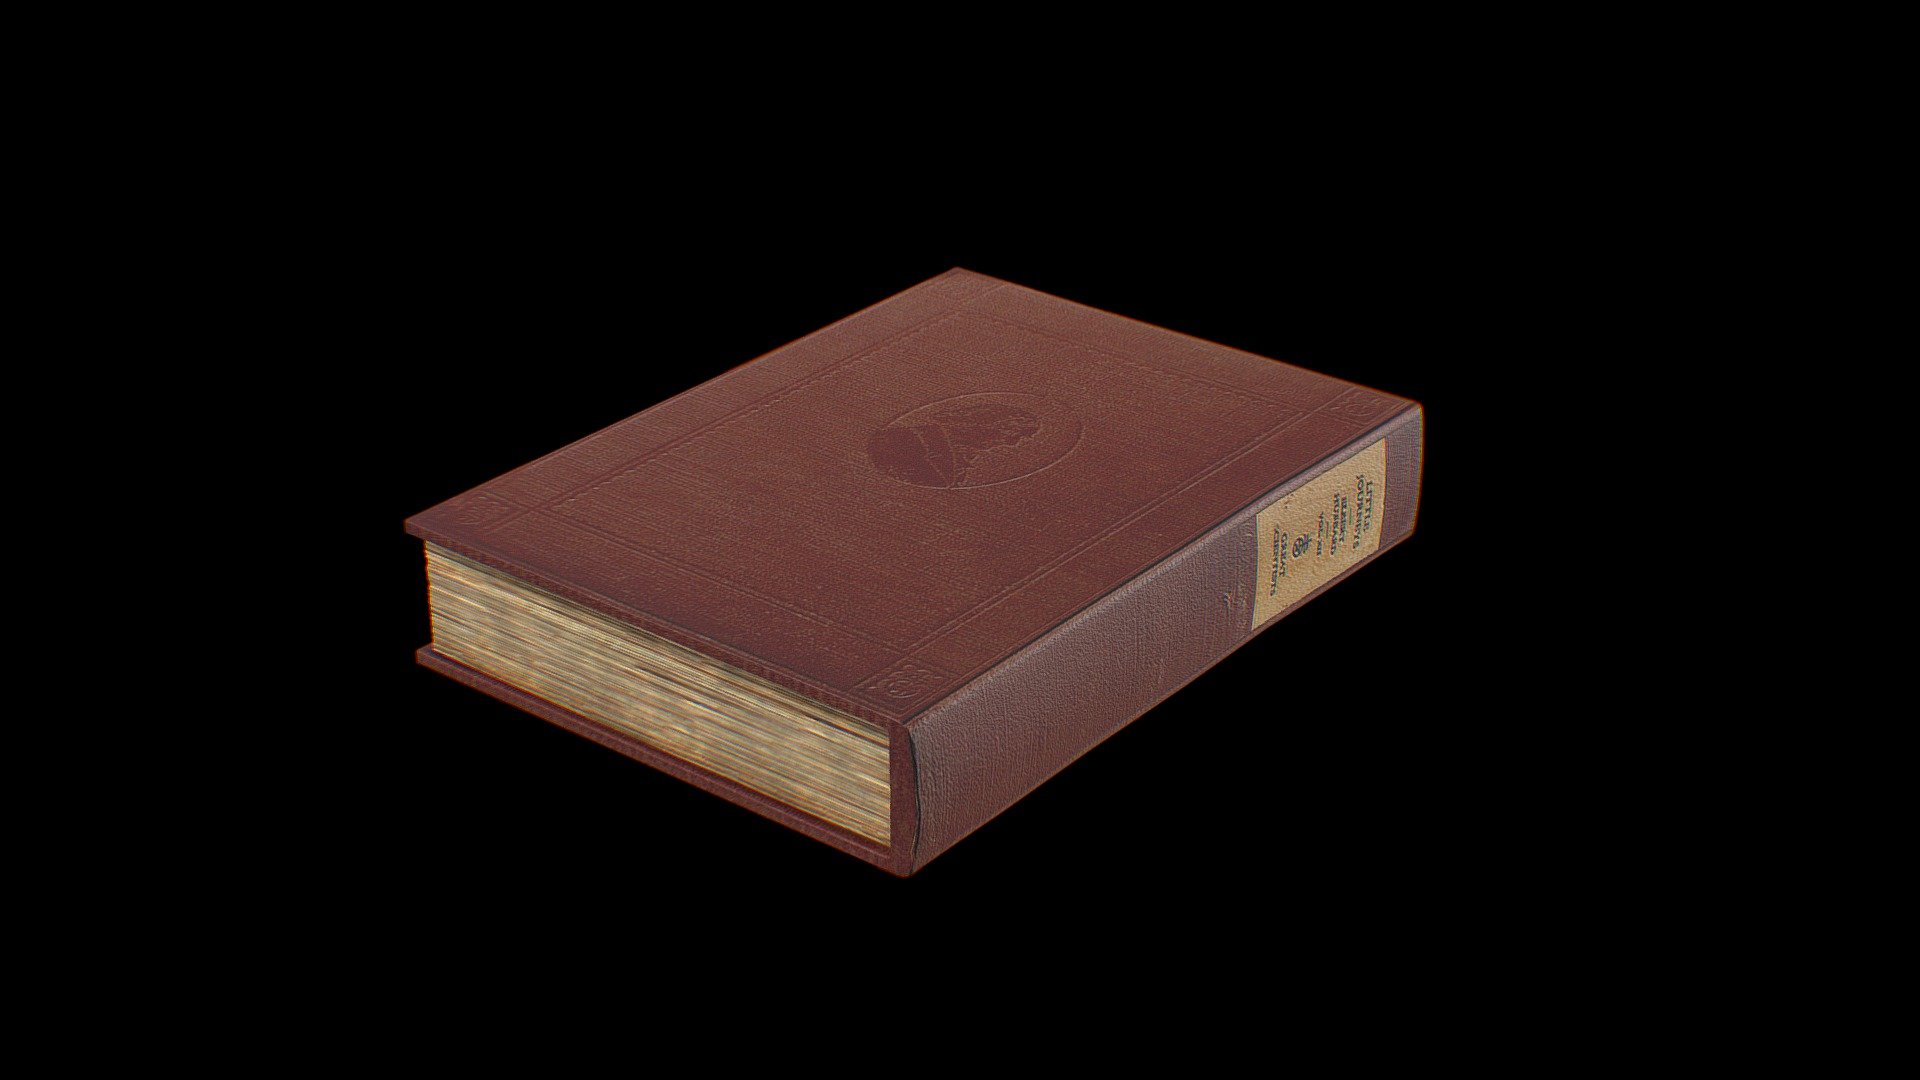 Free download：www.freepoly.org - Old Book-Freepoly.org - Download Free 3D model by Freepoly.org (@blackrray) 3d model